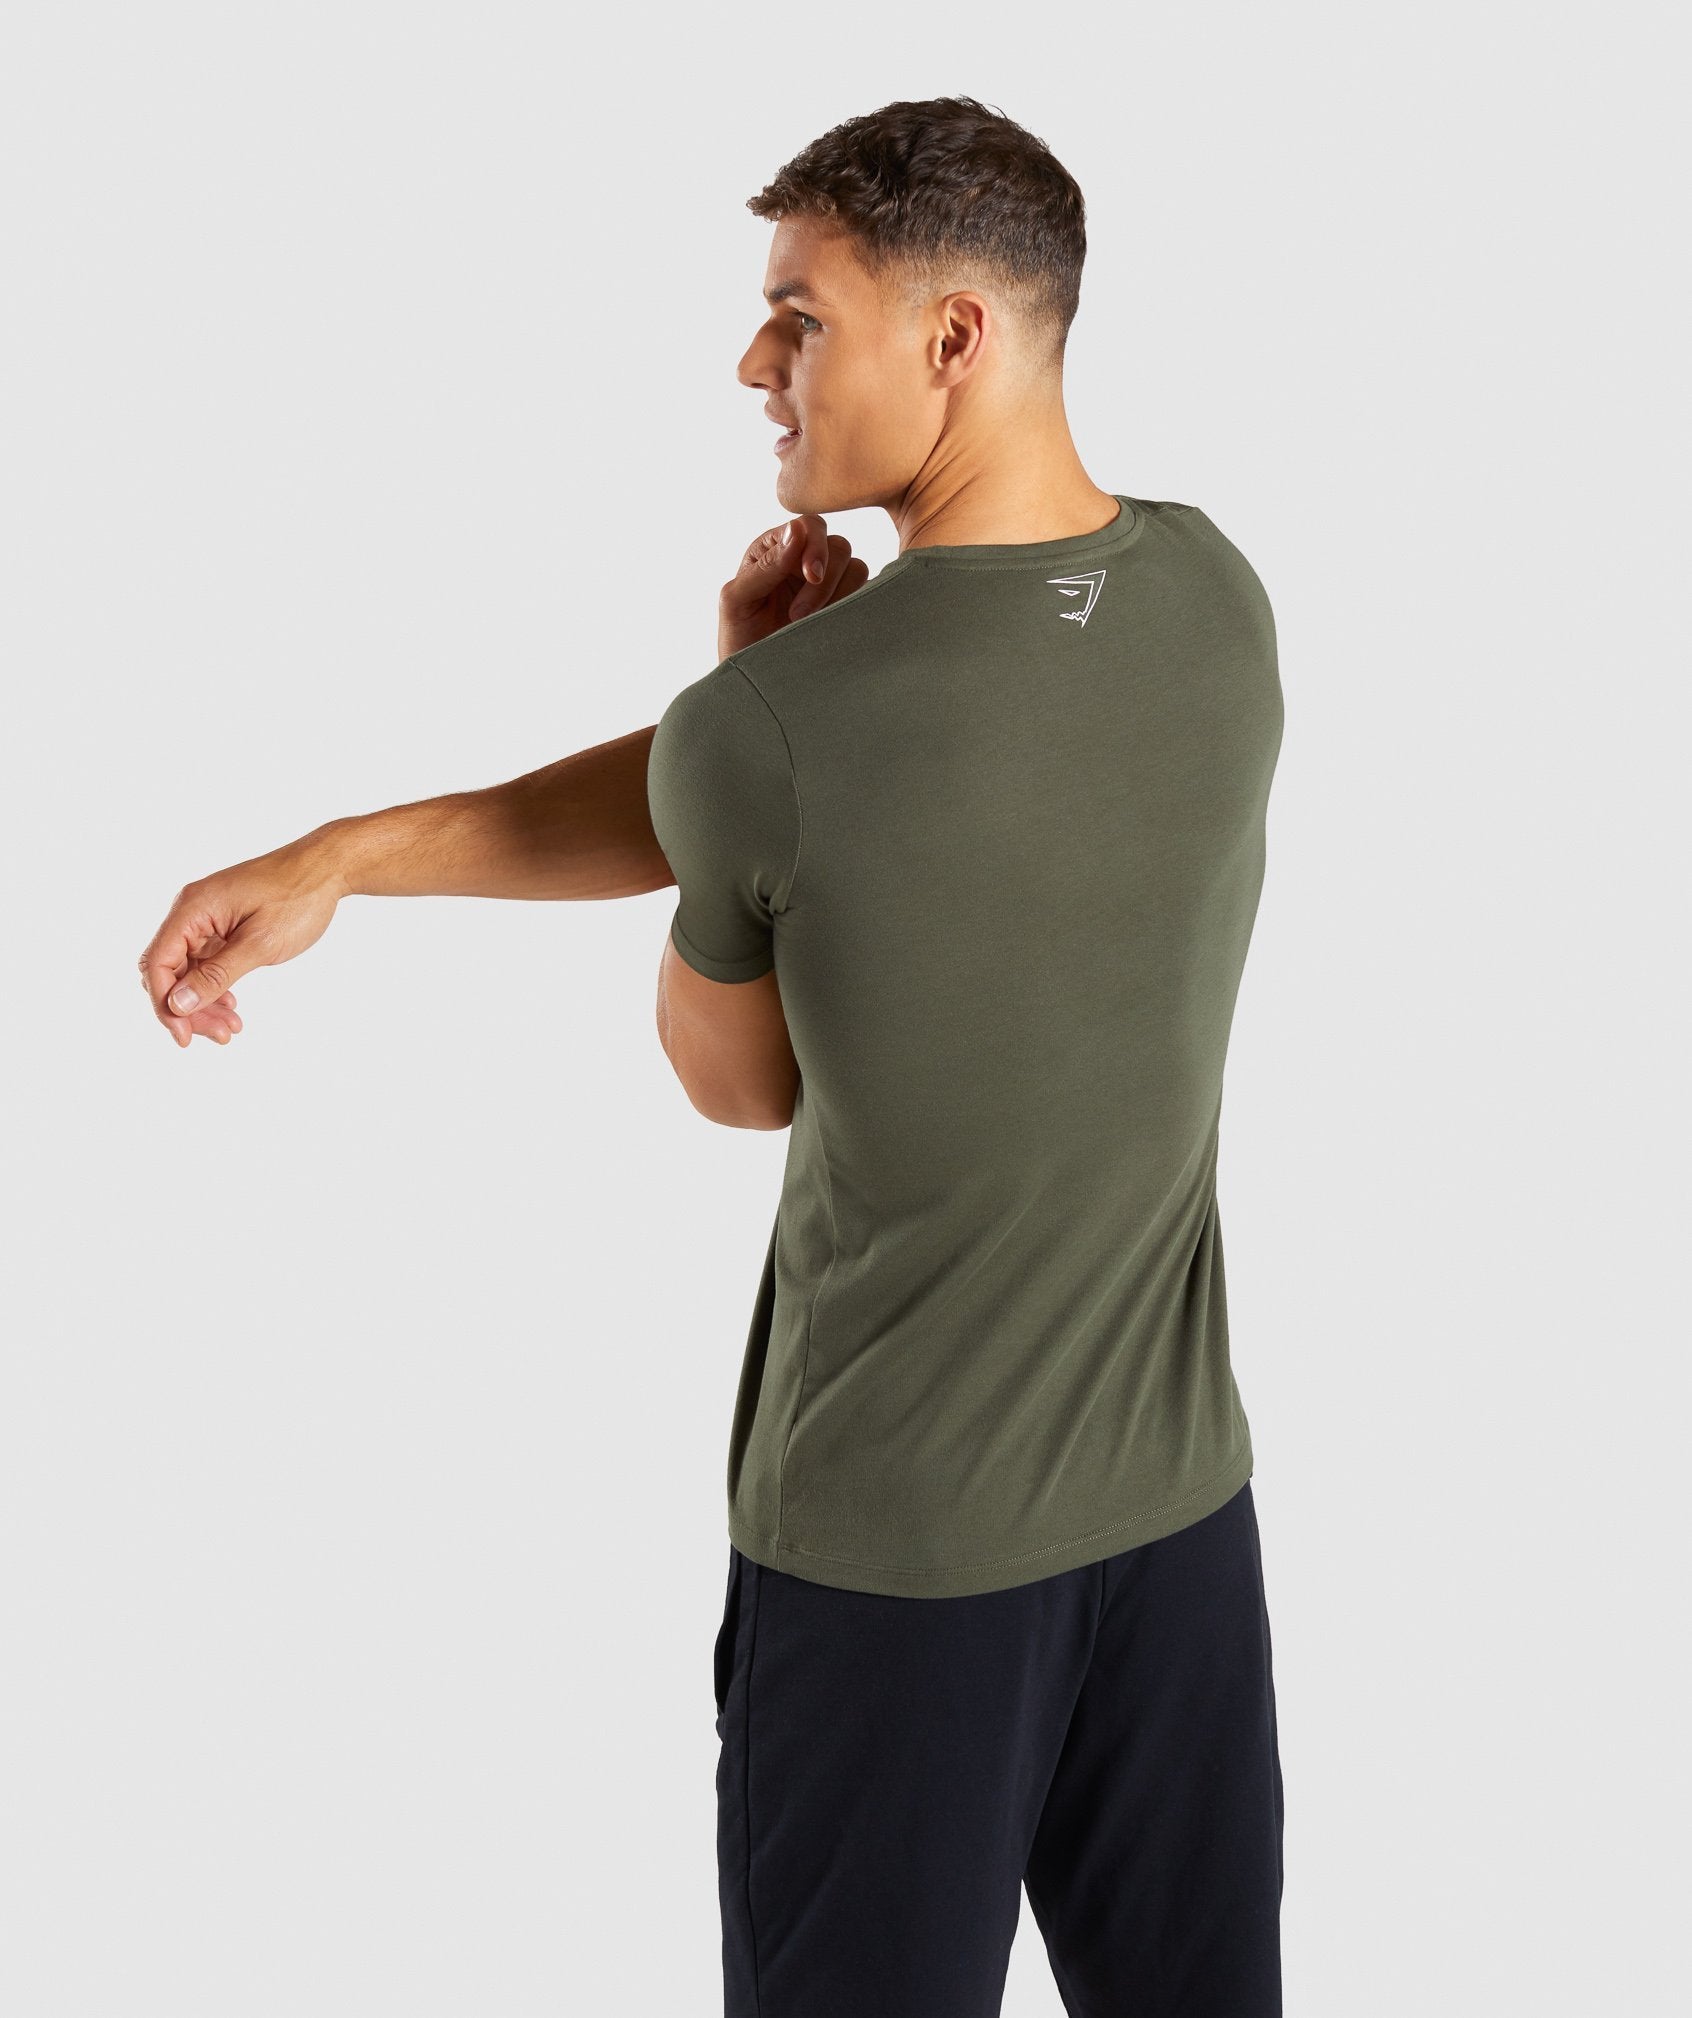 Profile T-Shirt in Woodland Green - view 2